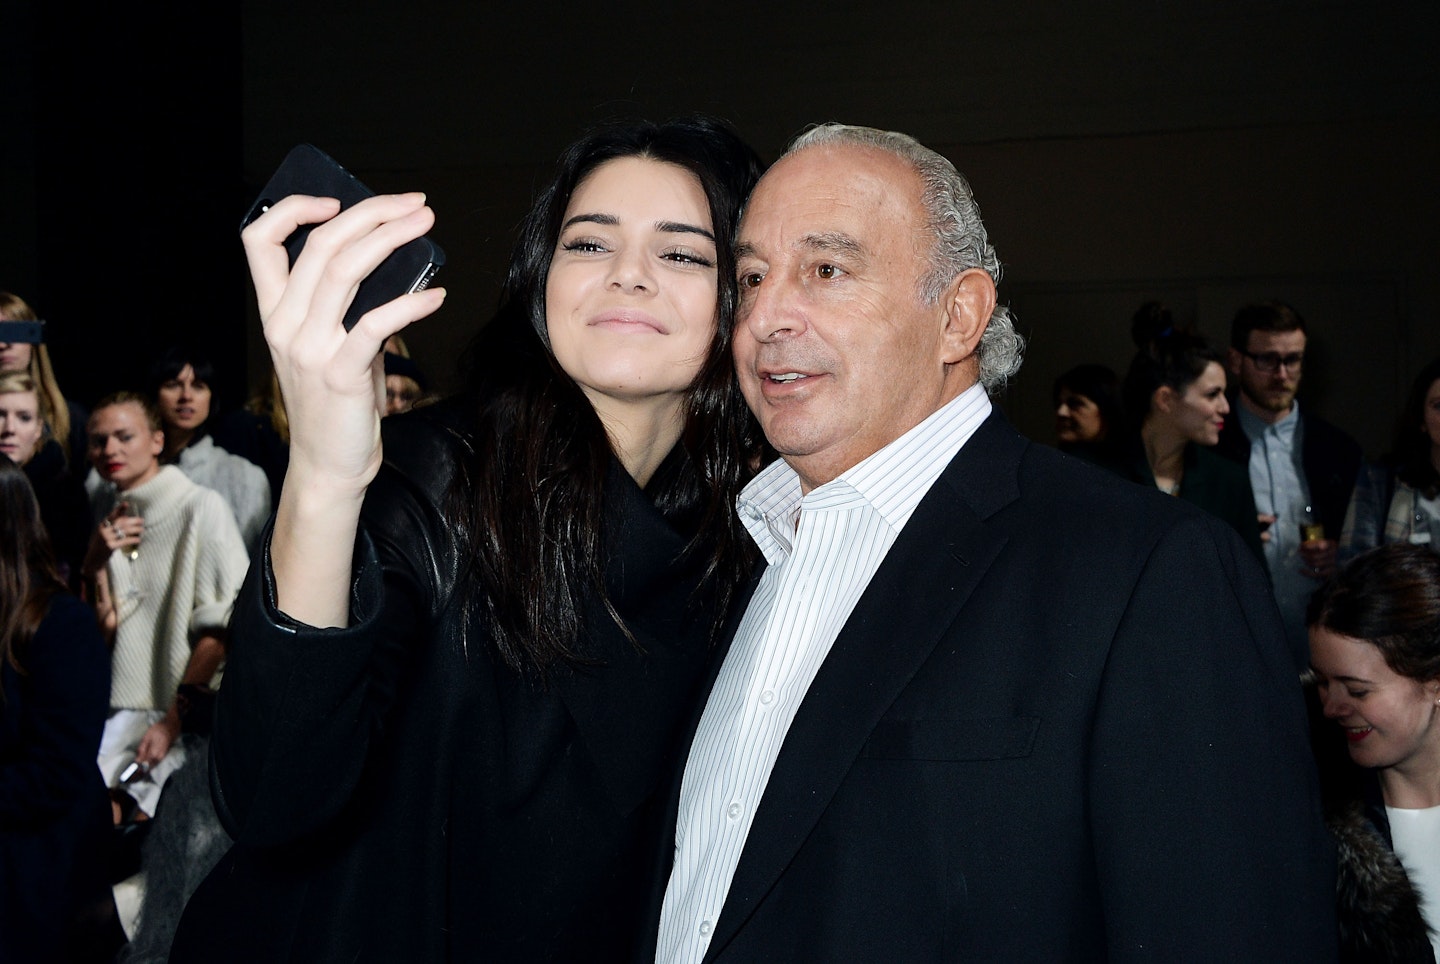 Kendall Jenner with Topshop's Philip Green [Getty]